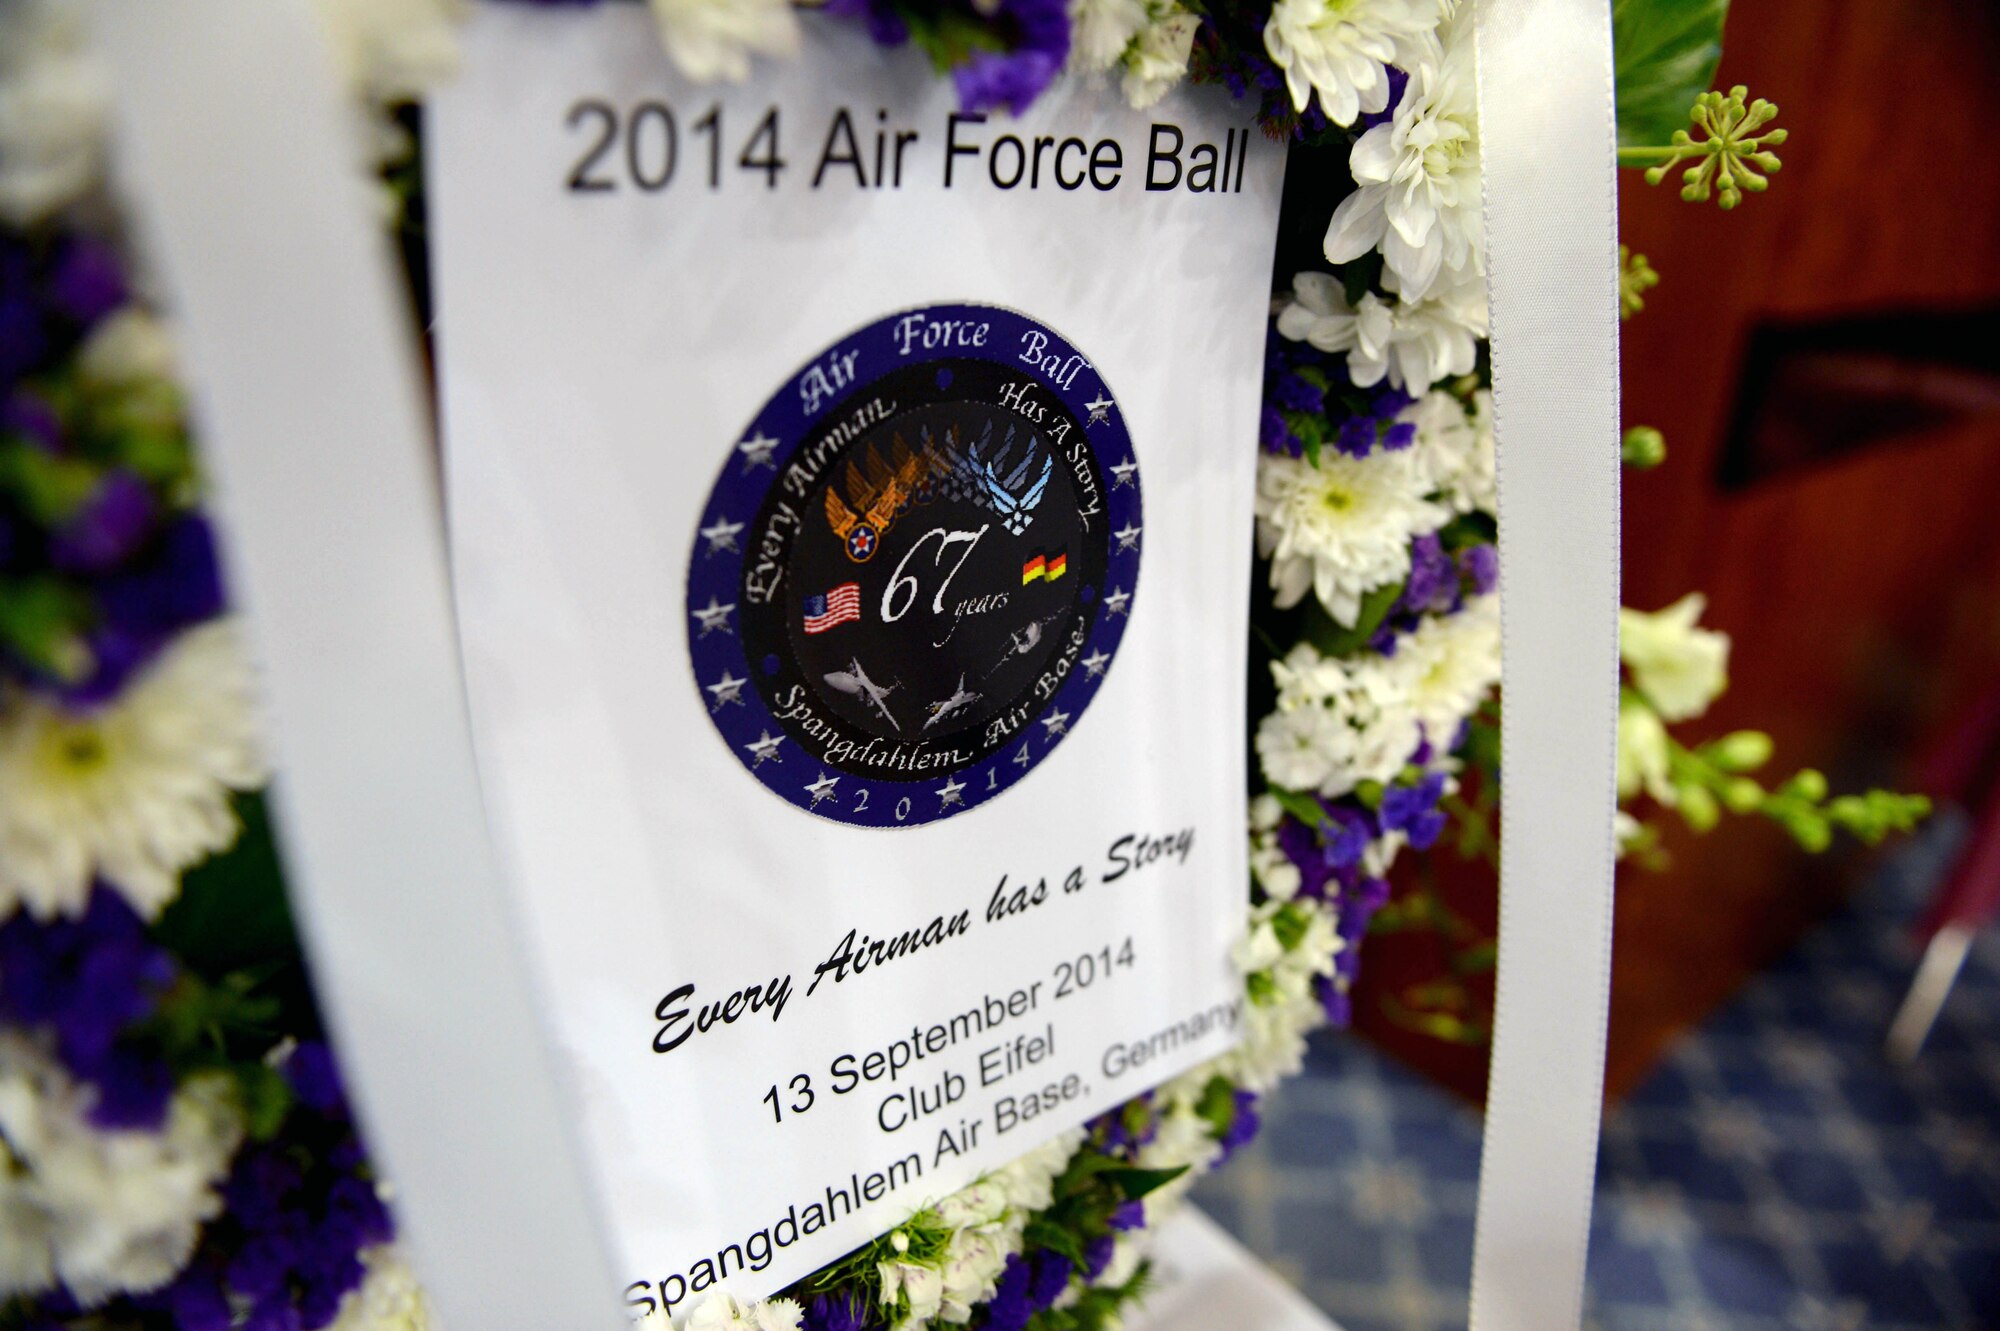 The program for the 2014 Air Force Ball is displayed at Spangdahlem Air Base, Germany, Sept. 13, 2014. Spangdahlem Airmen and their family members attended the ball, complete with food and entertainment. (U.S. Air Force photo by Airman 1st Class Timothy Kim/Released)